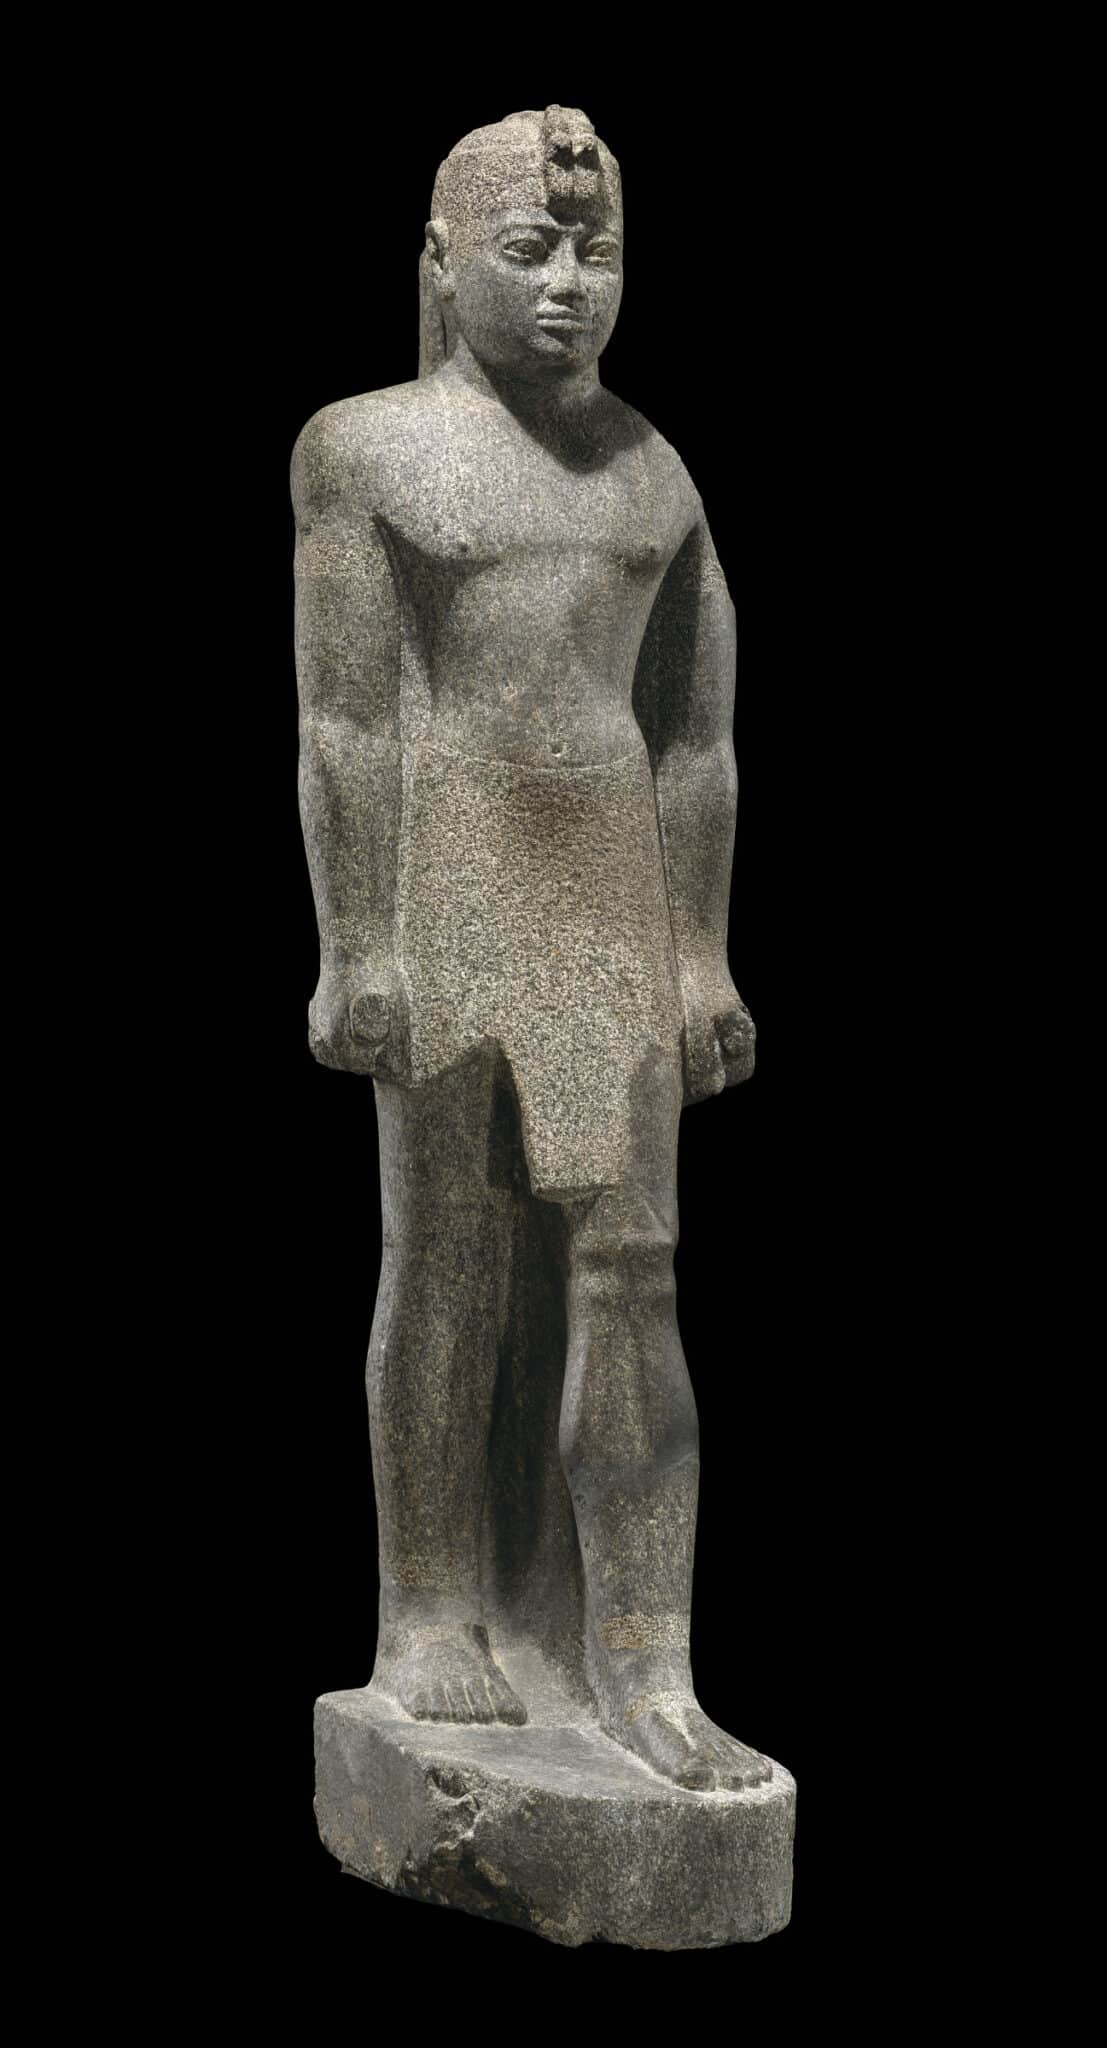 “Ancient Nubia: Art of the 25th Dynasty" from the Collection of the Museum of Fine Arts, Boston